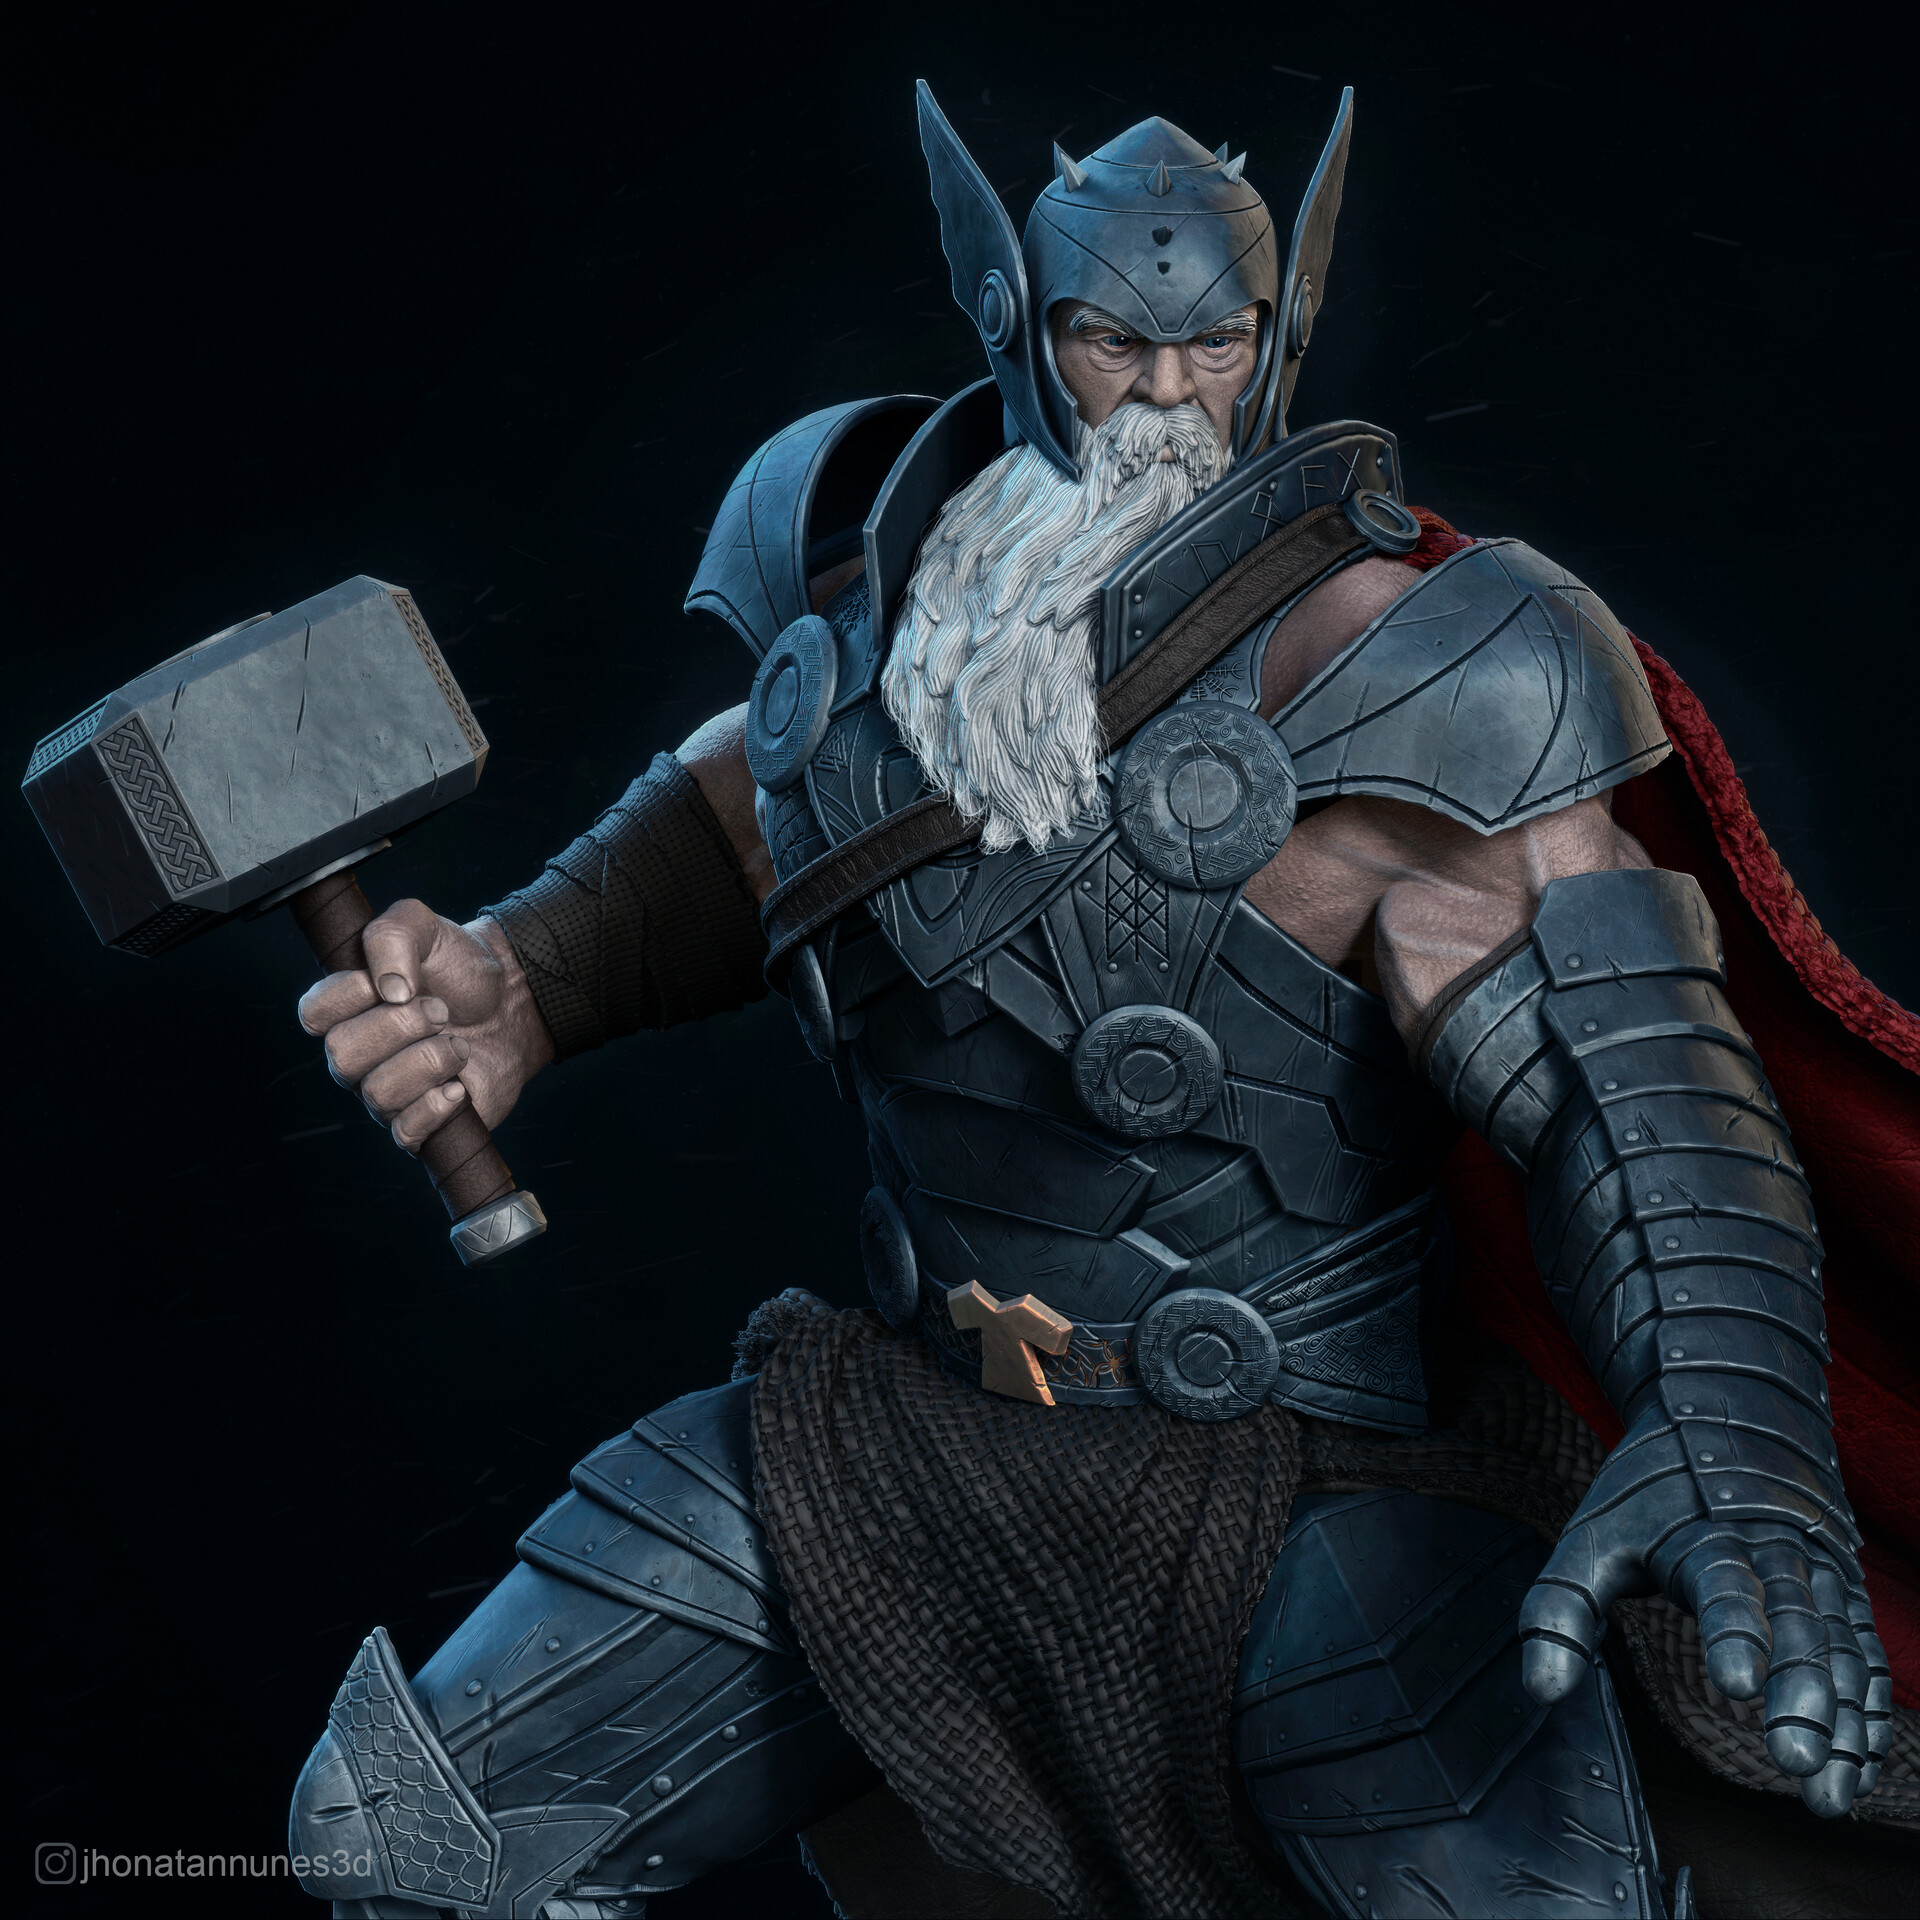 King Thor 3D Printing Figurine | Assembly